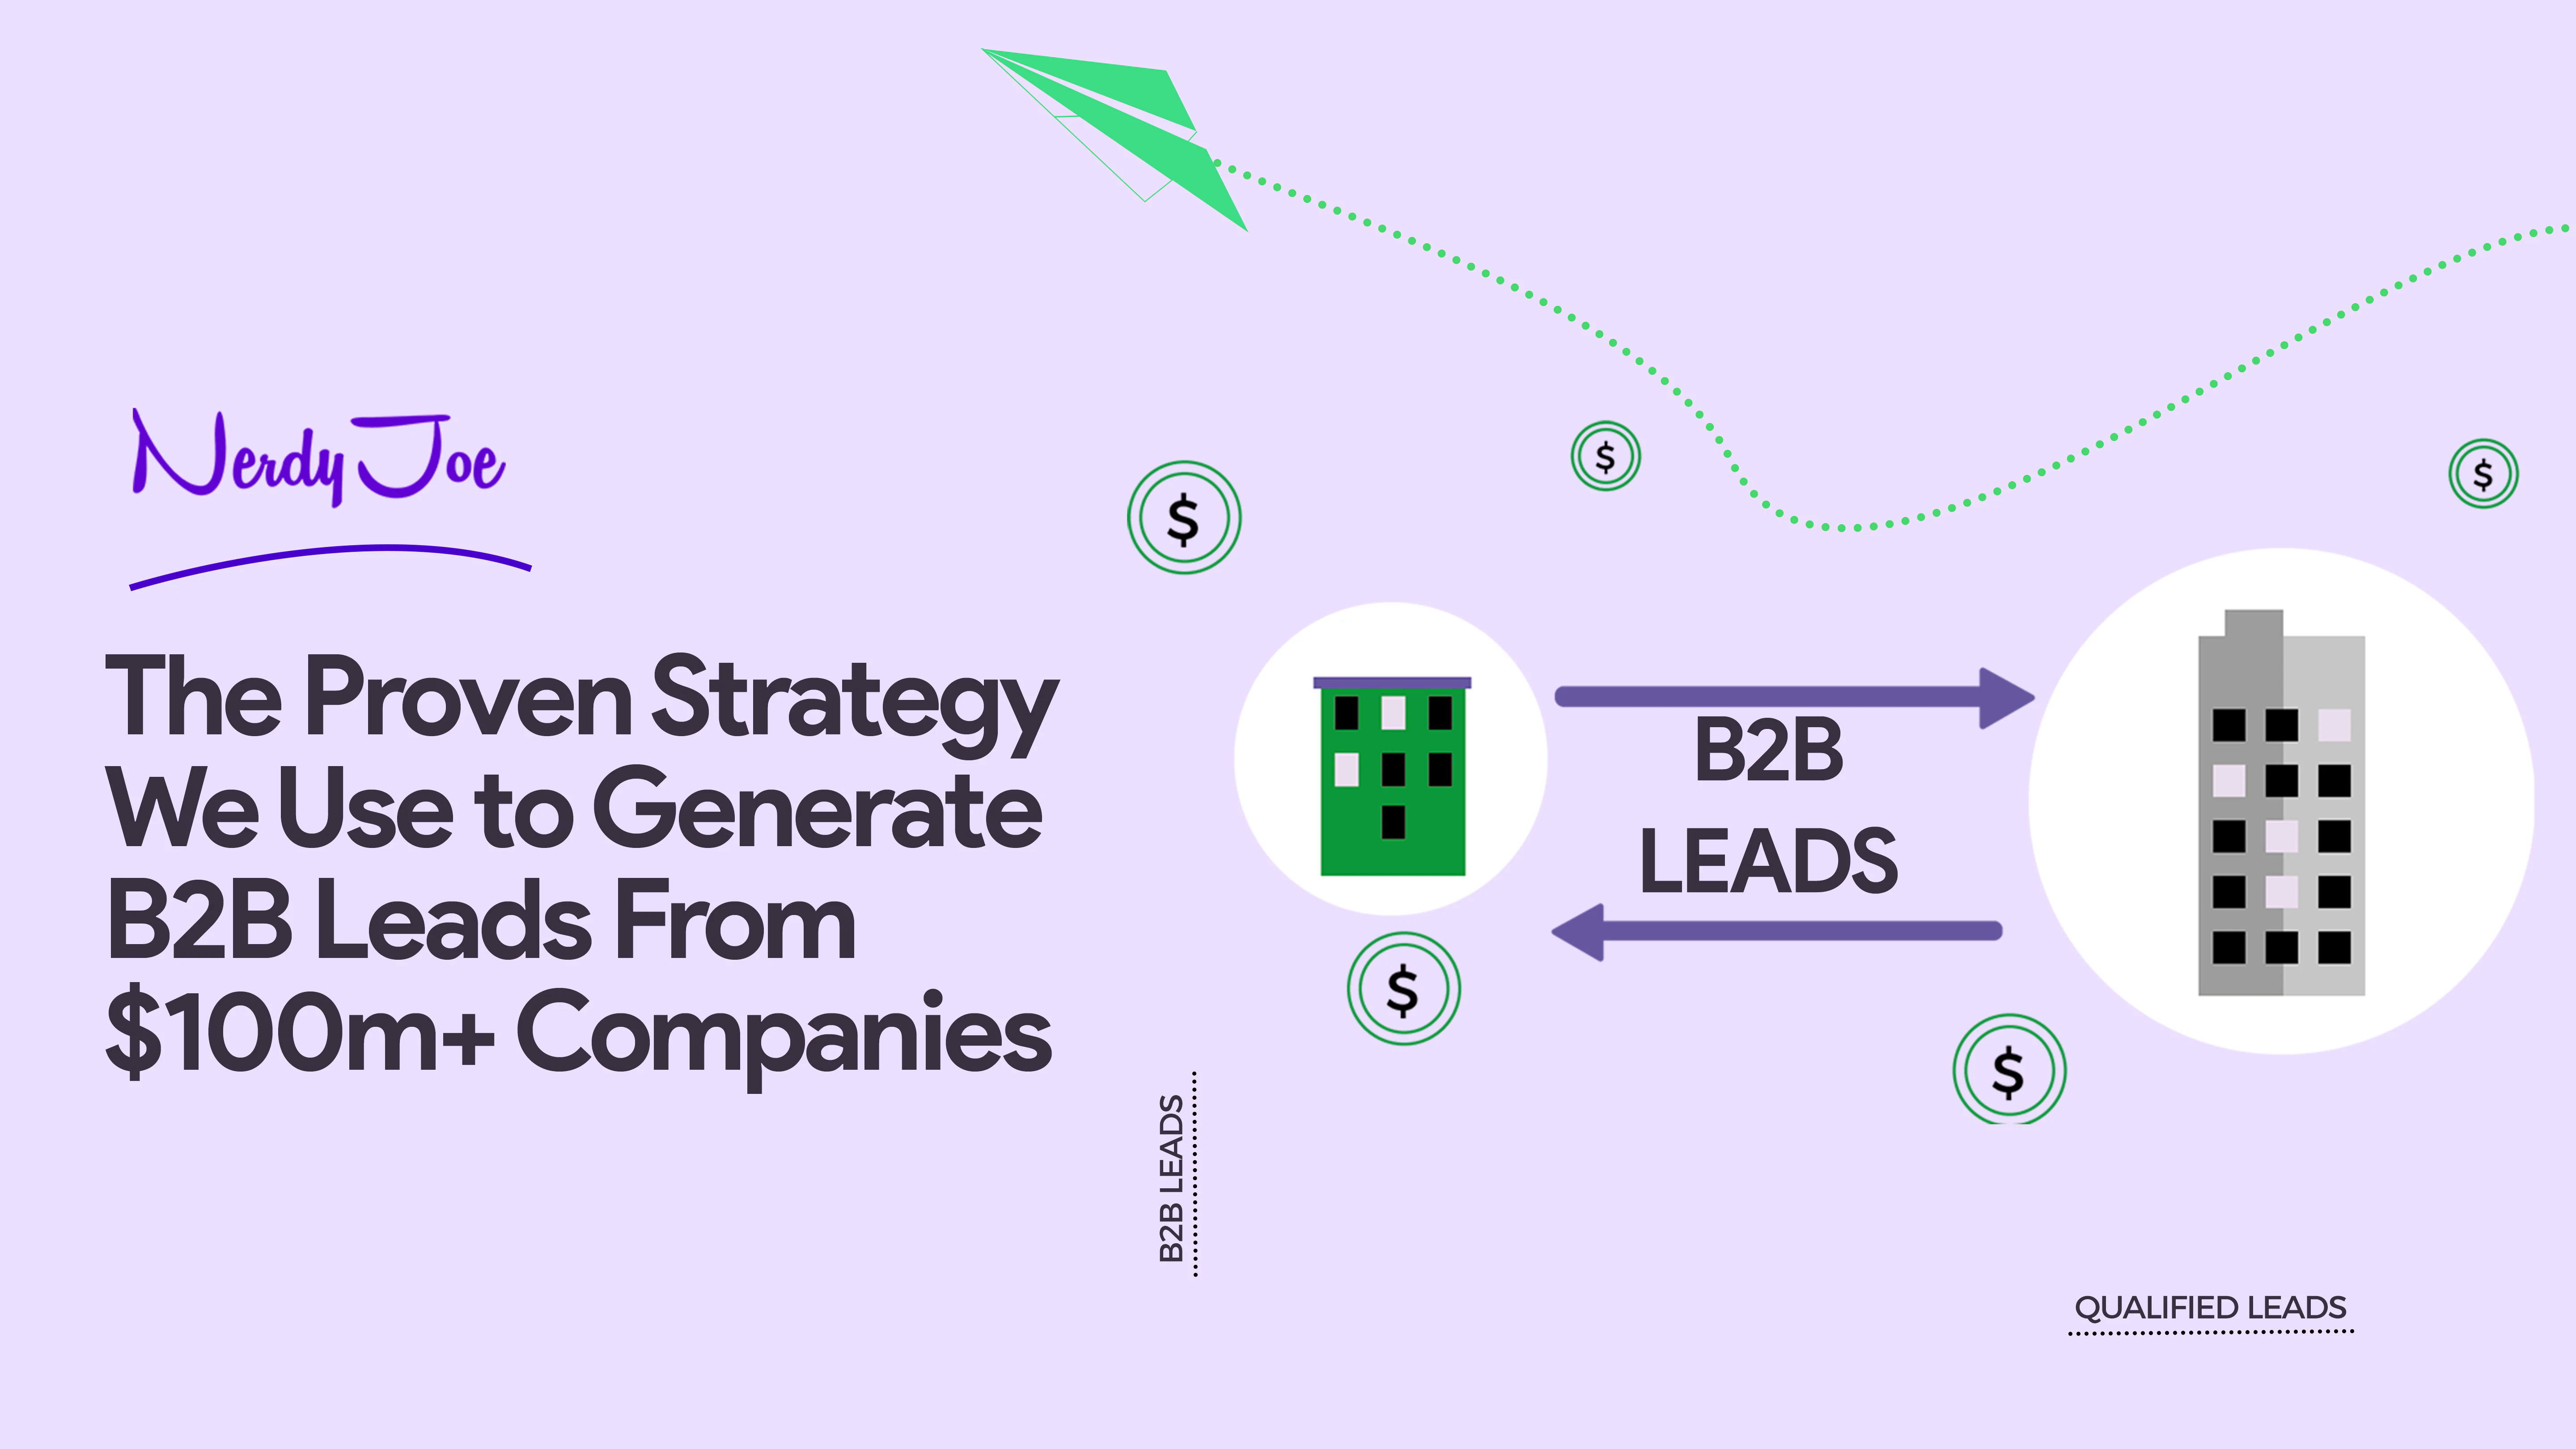 The Proven Strategy We Use to Generate B2b Leads From $100m+ Companies